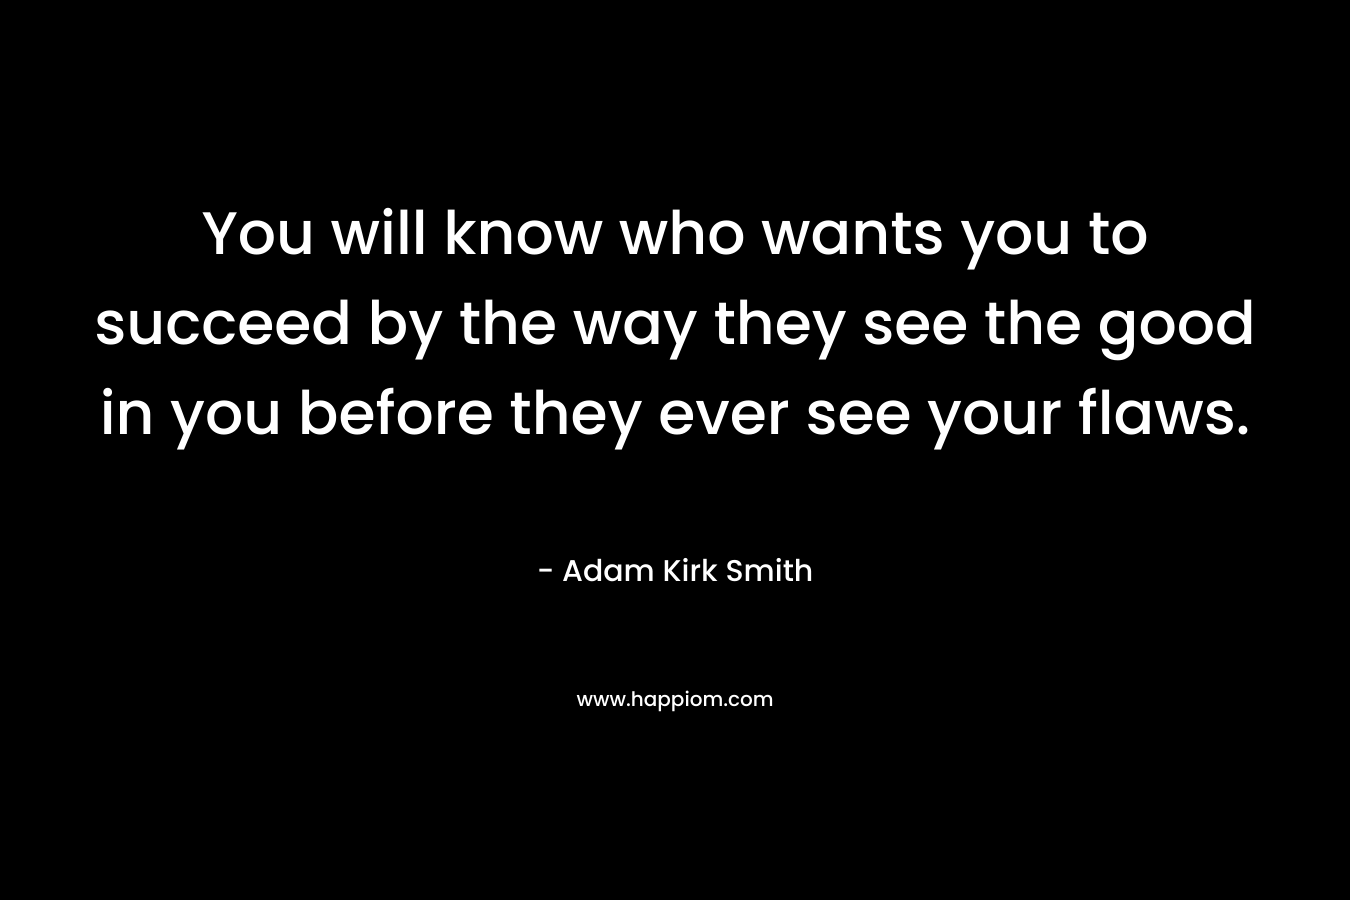 You will know who wants you to succeed by the way they see the good in you before they ever see your flaws. – Adam Kirk Smith